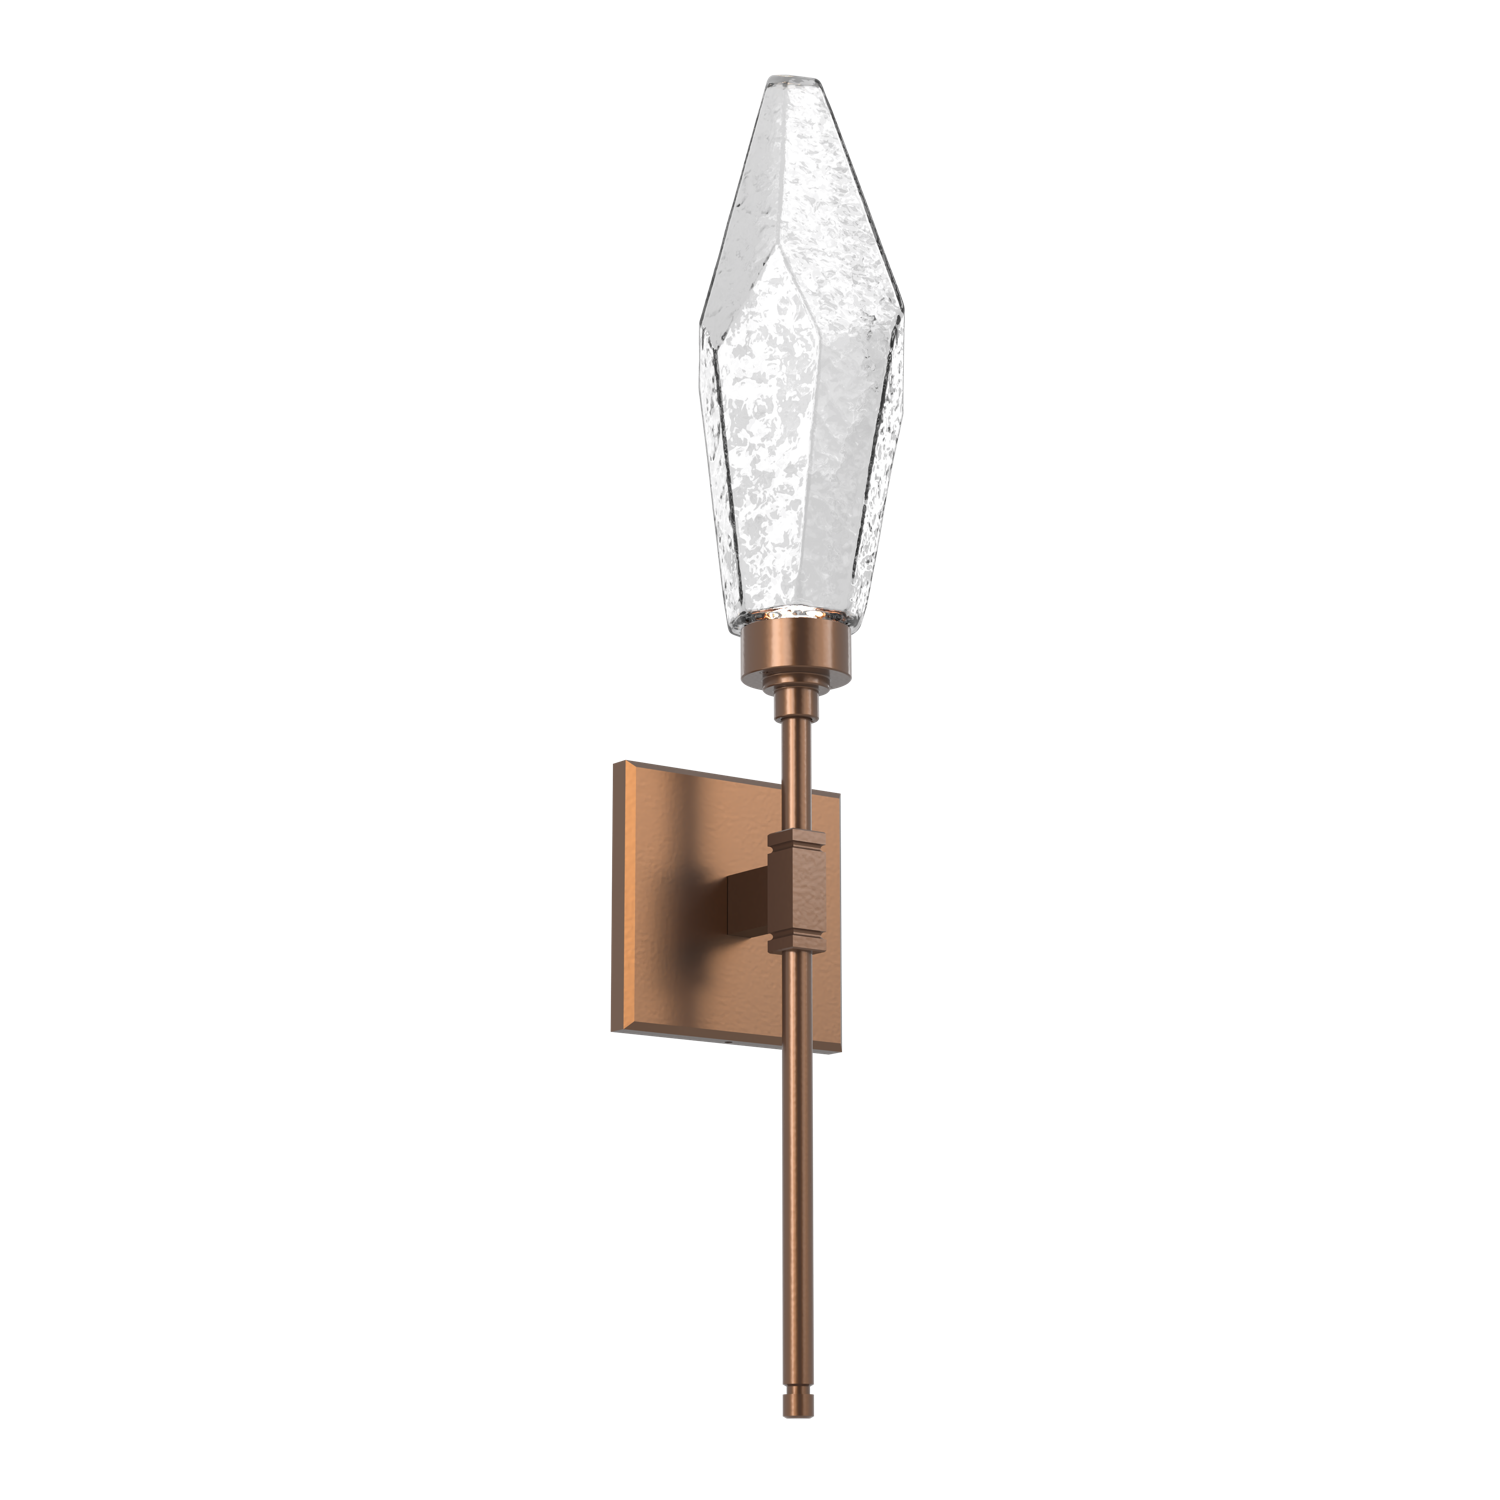 IDB0050-04-BB-CC-Hammerton-Studio-Rock-Crystal-ada-certified-belvedere-wall-sconce-with-burnished-bronze-finish-and-clear-glass-shades-and-LED-lamping